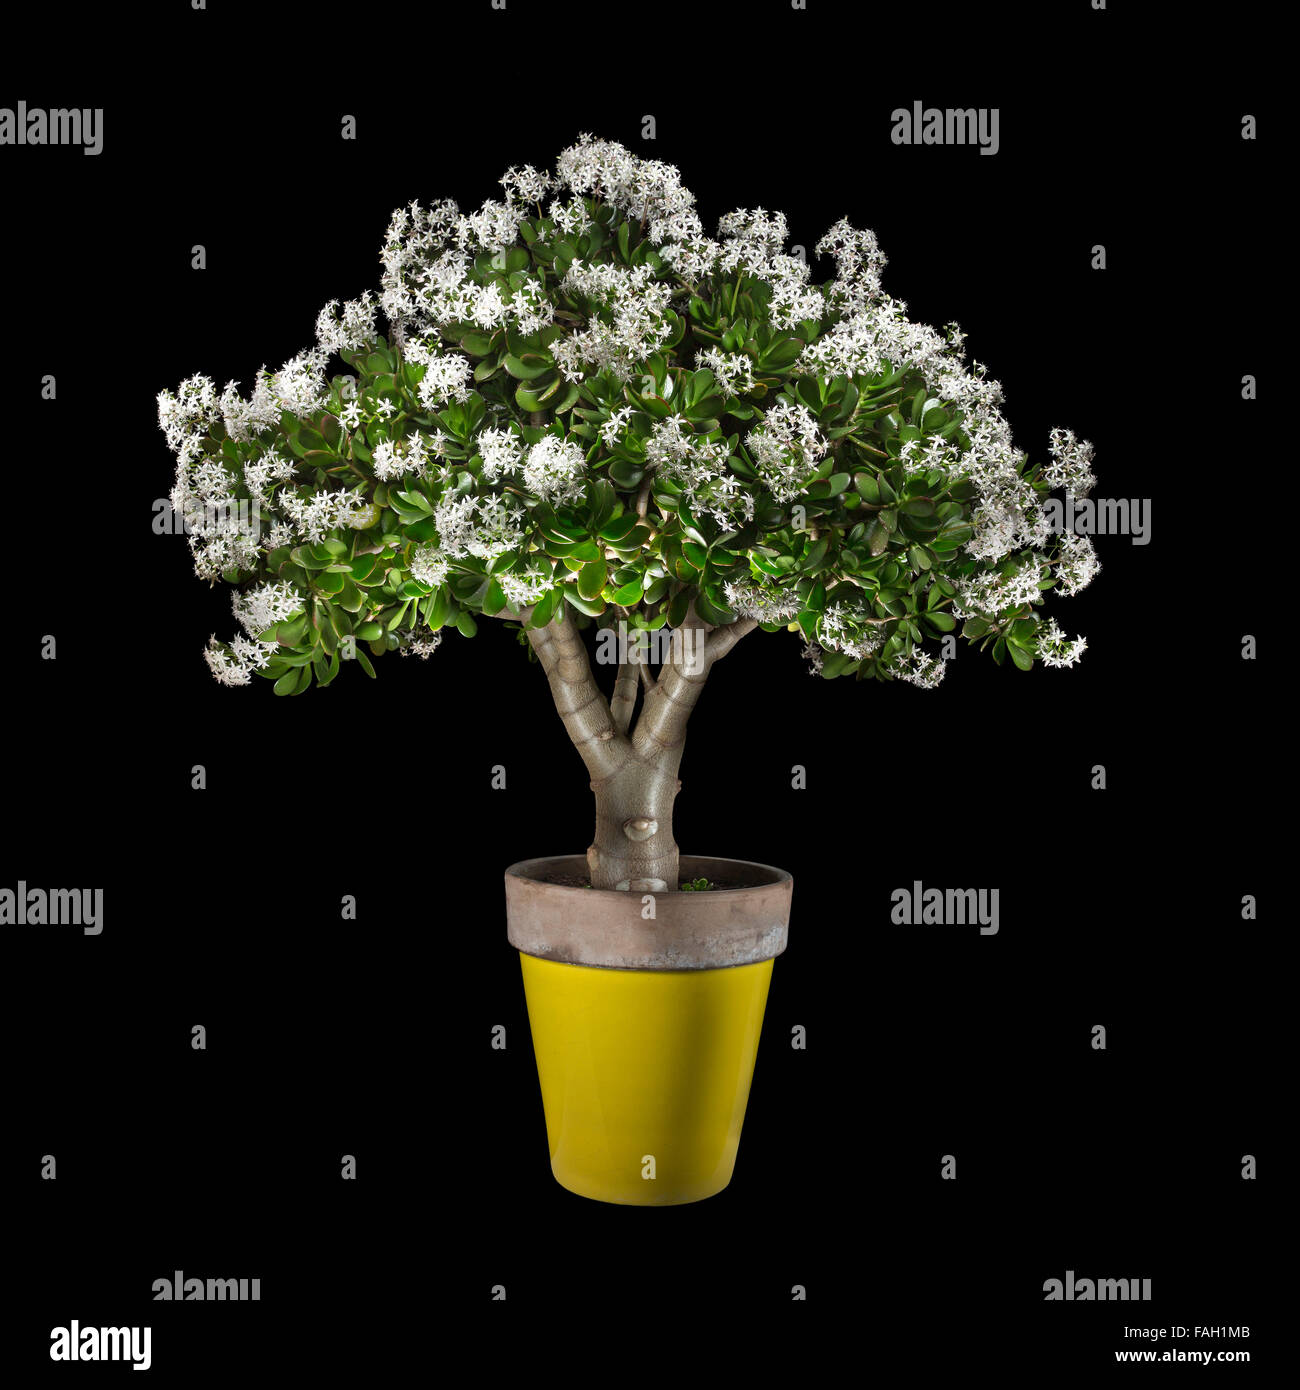 A pot plant of a blossoming Crassula ovata, commonly known as Jade plant, photographed in the studio on a black background. Stock Photo